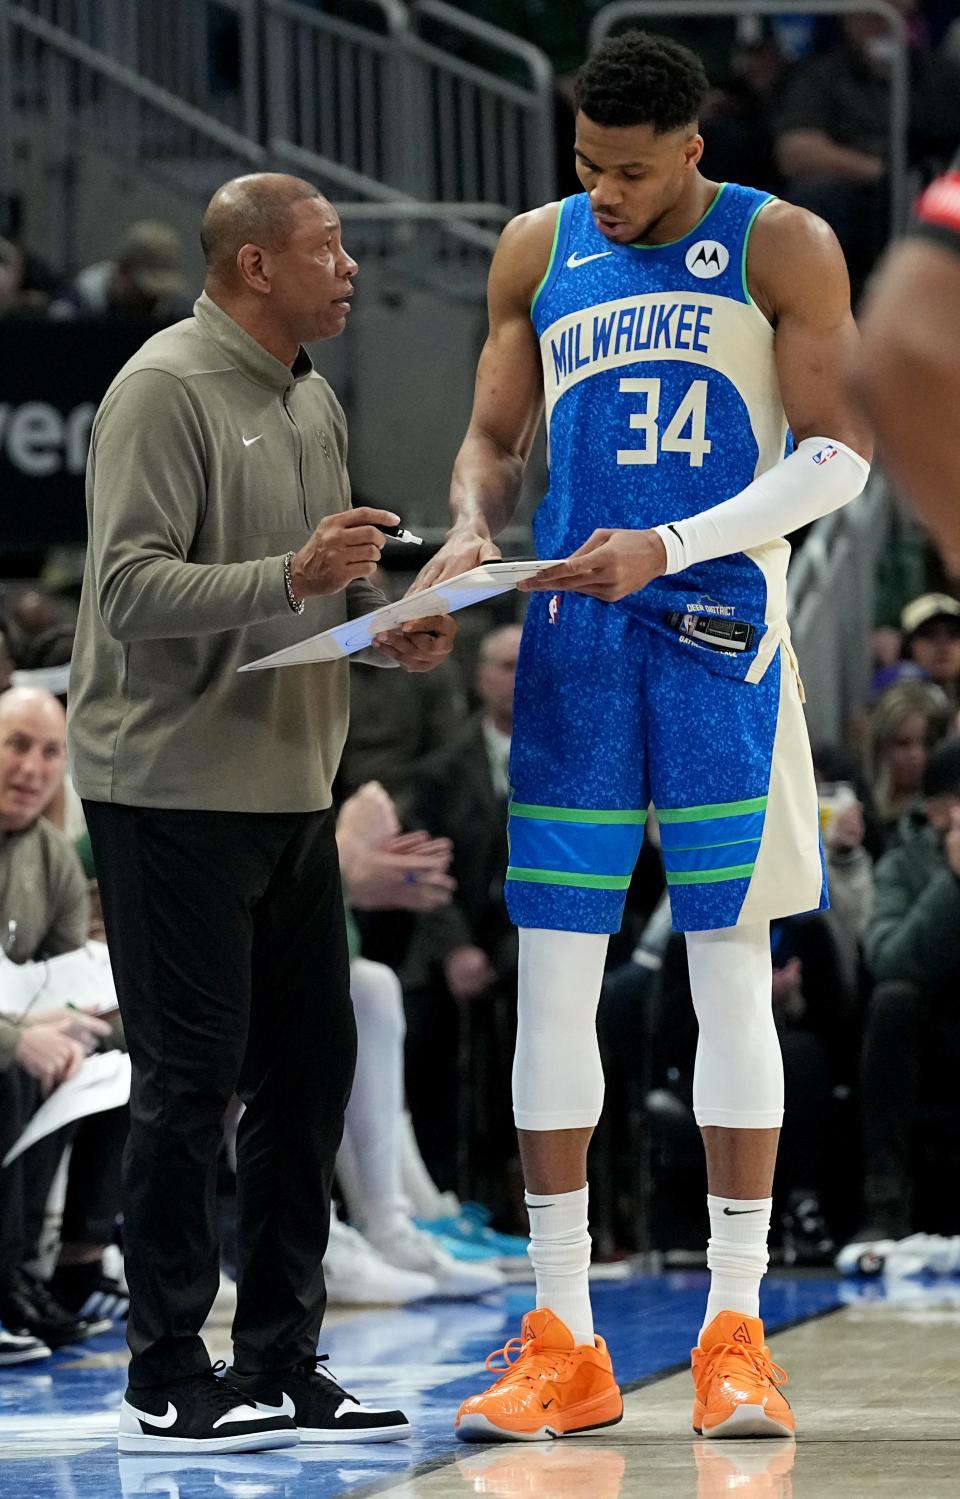 Bucks head coach Doc Rivers talks with forward Giannis Antetokounmpo during a game in March. Having a training camp and season together should help them.